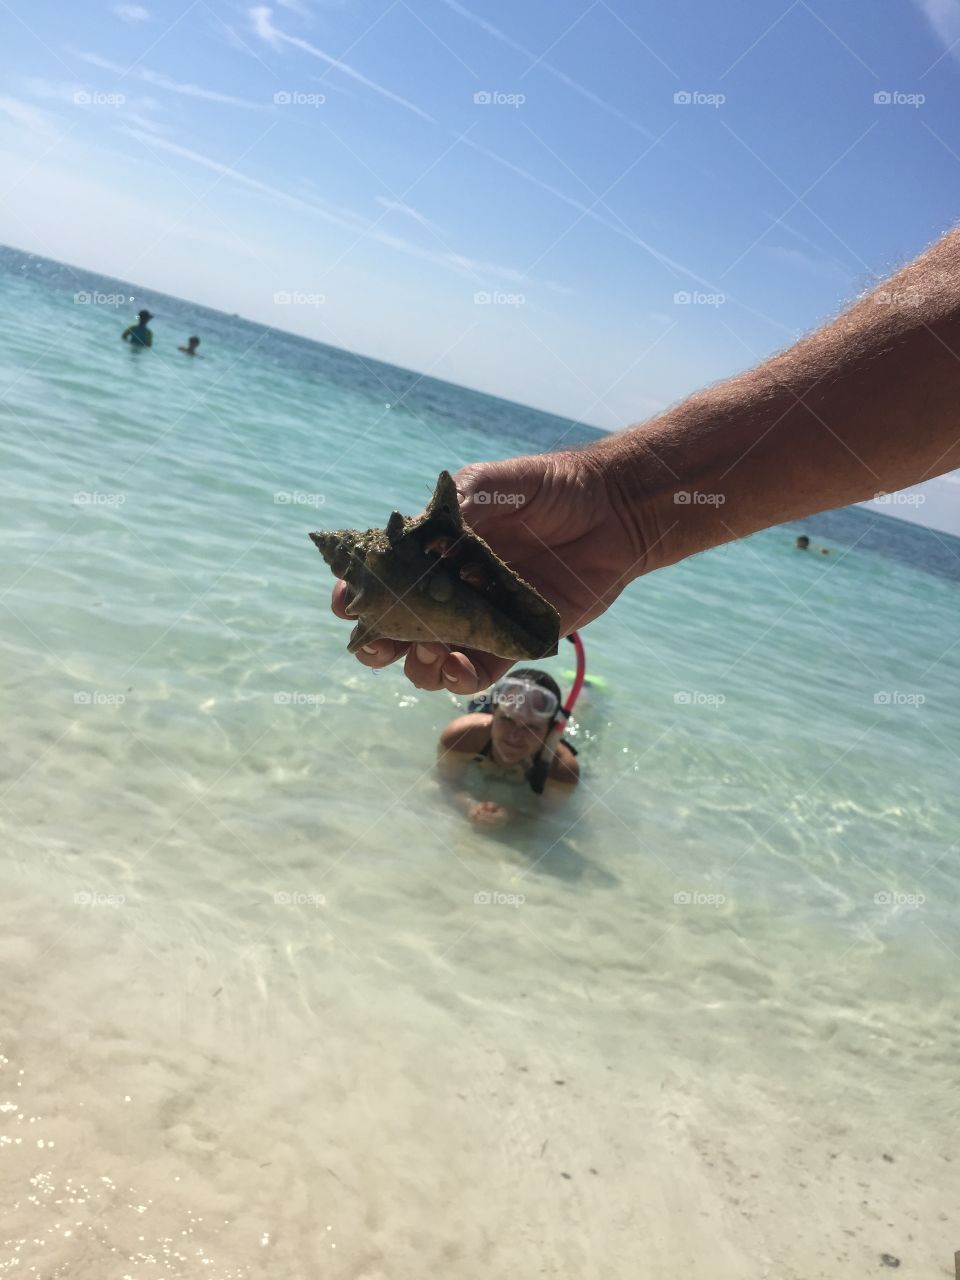 Key West, FL. I snapped this conch shell with a hermit crab in it as my friend swam up after snorkeling in Key West, FL